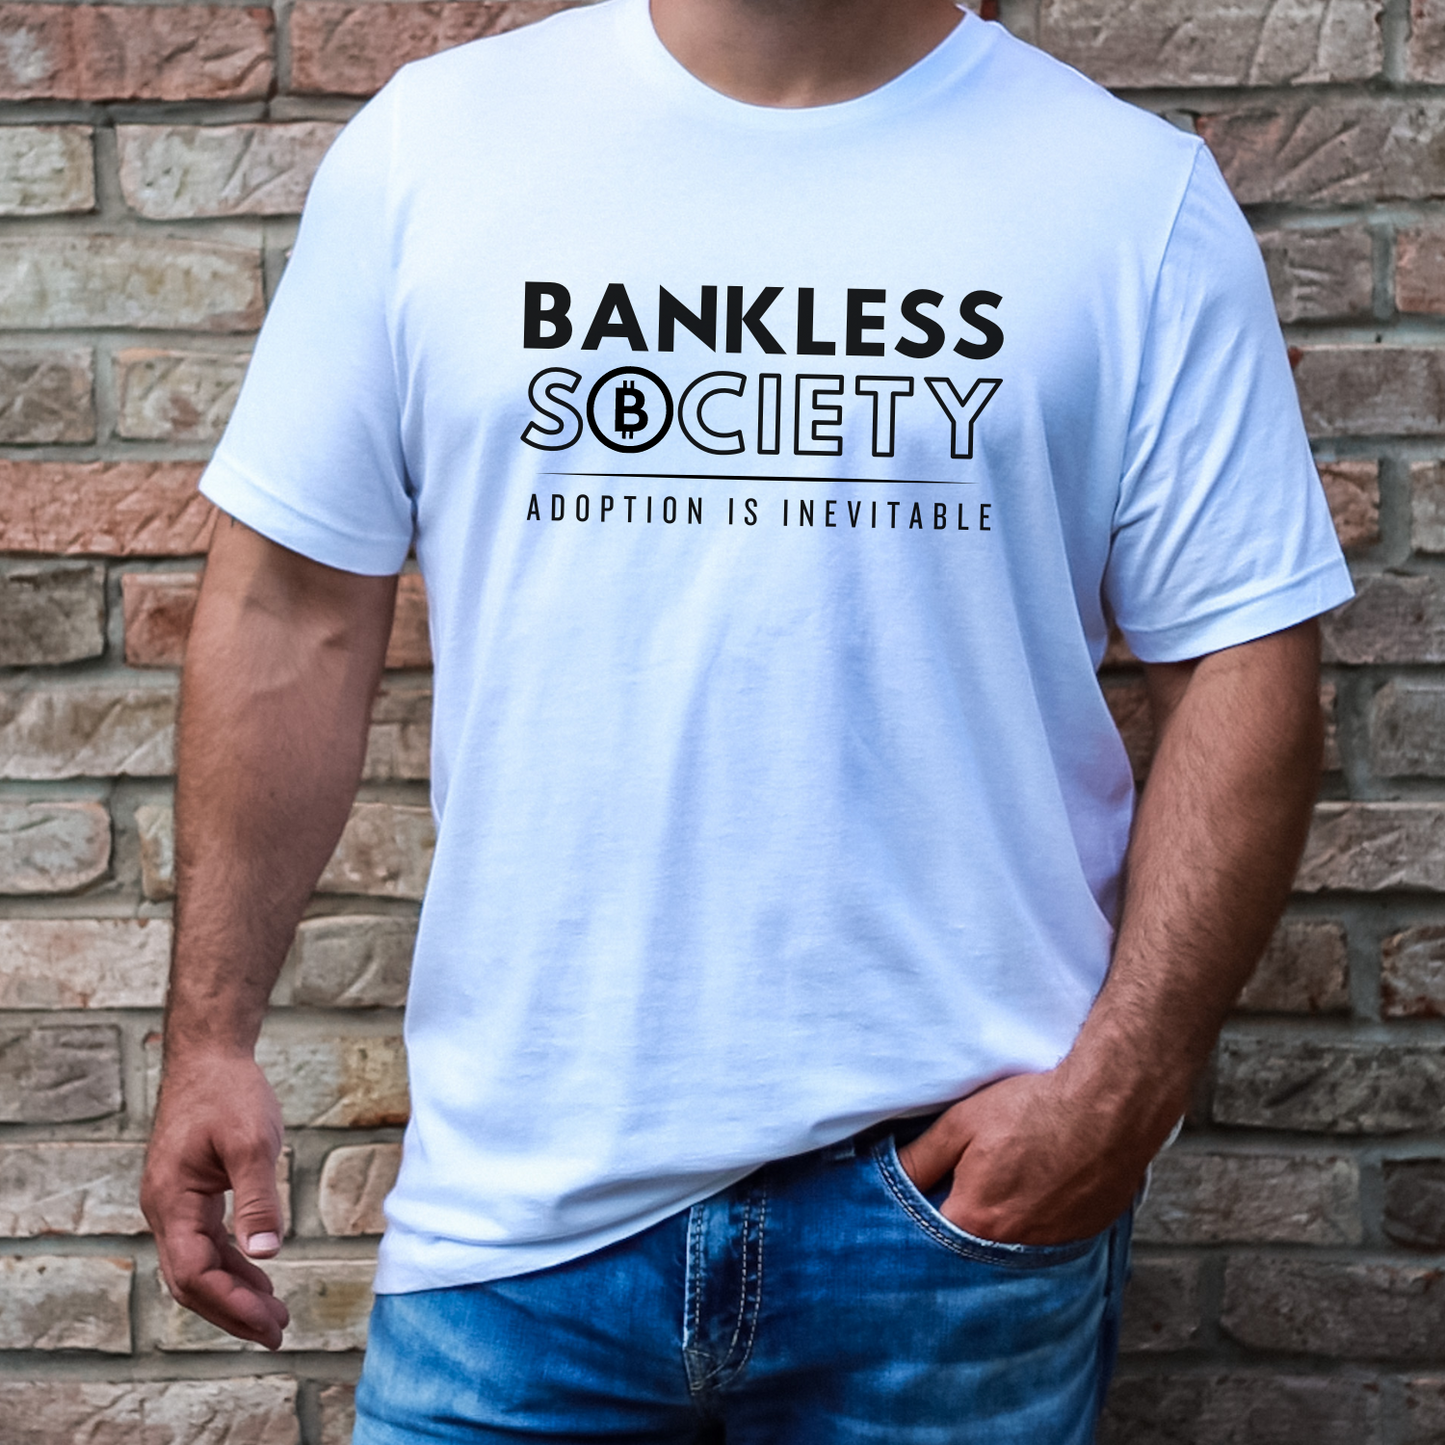 White Bella Canvas t-shirt, spreading the message of digital finance, and the future with a bankless society.